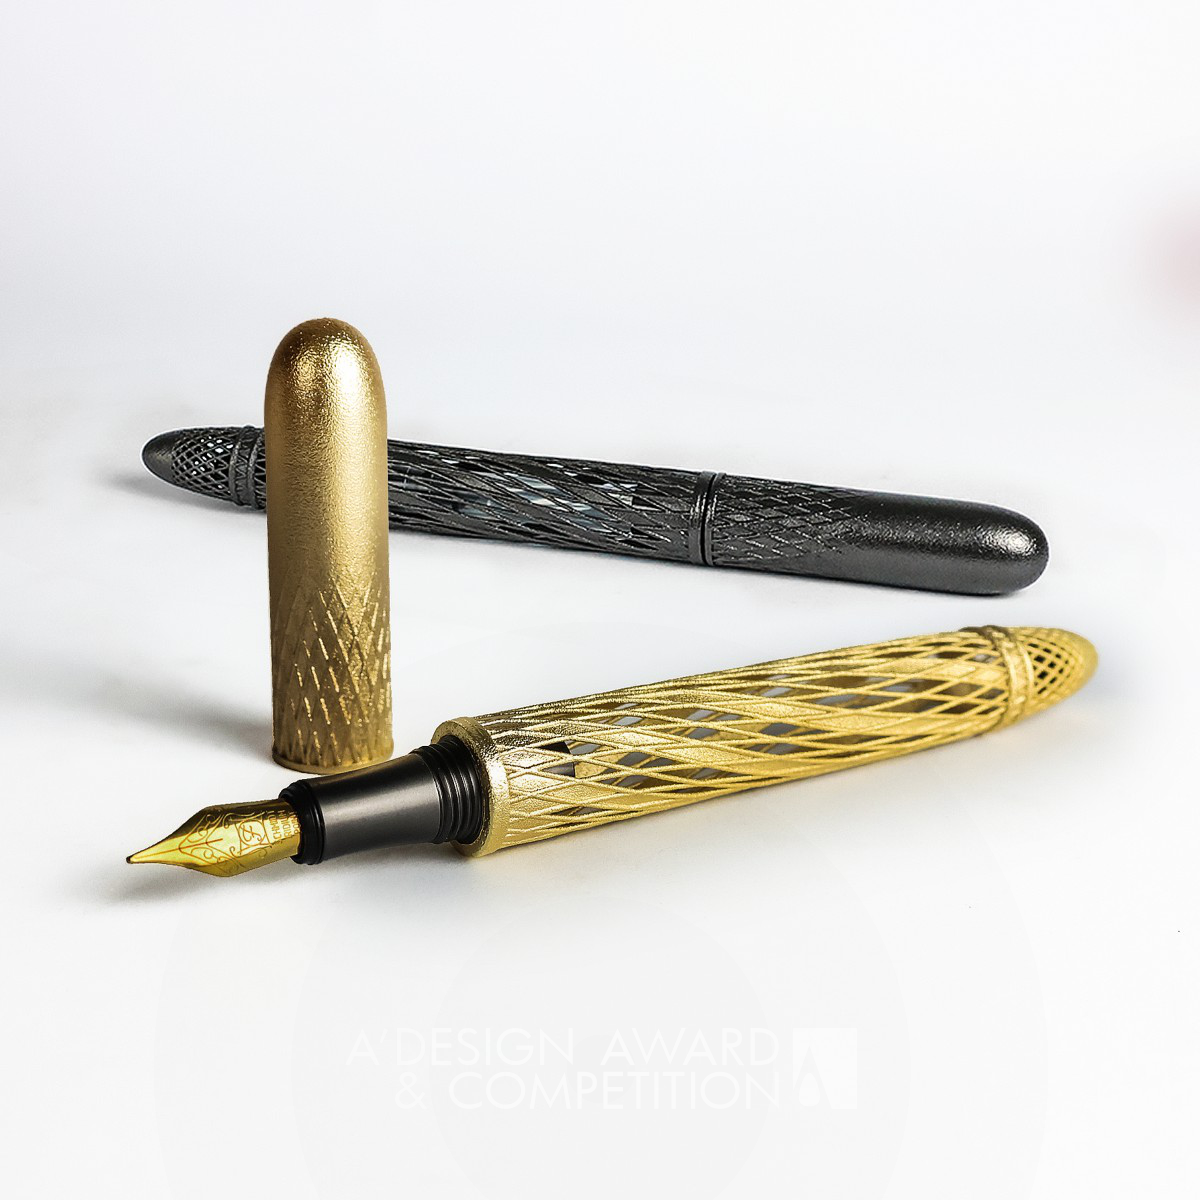 ChungSheng Chen wins Iron at the prestigious A' Art and Stationery Supplies Design Award with 3D Buildmesh Fountain Pen.